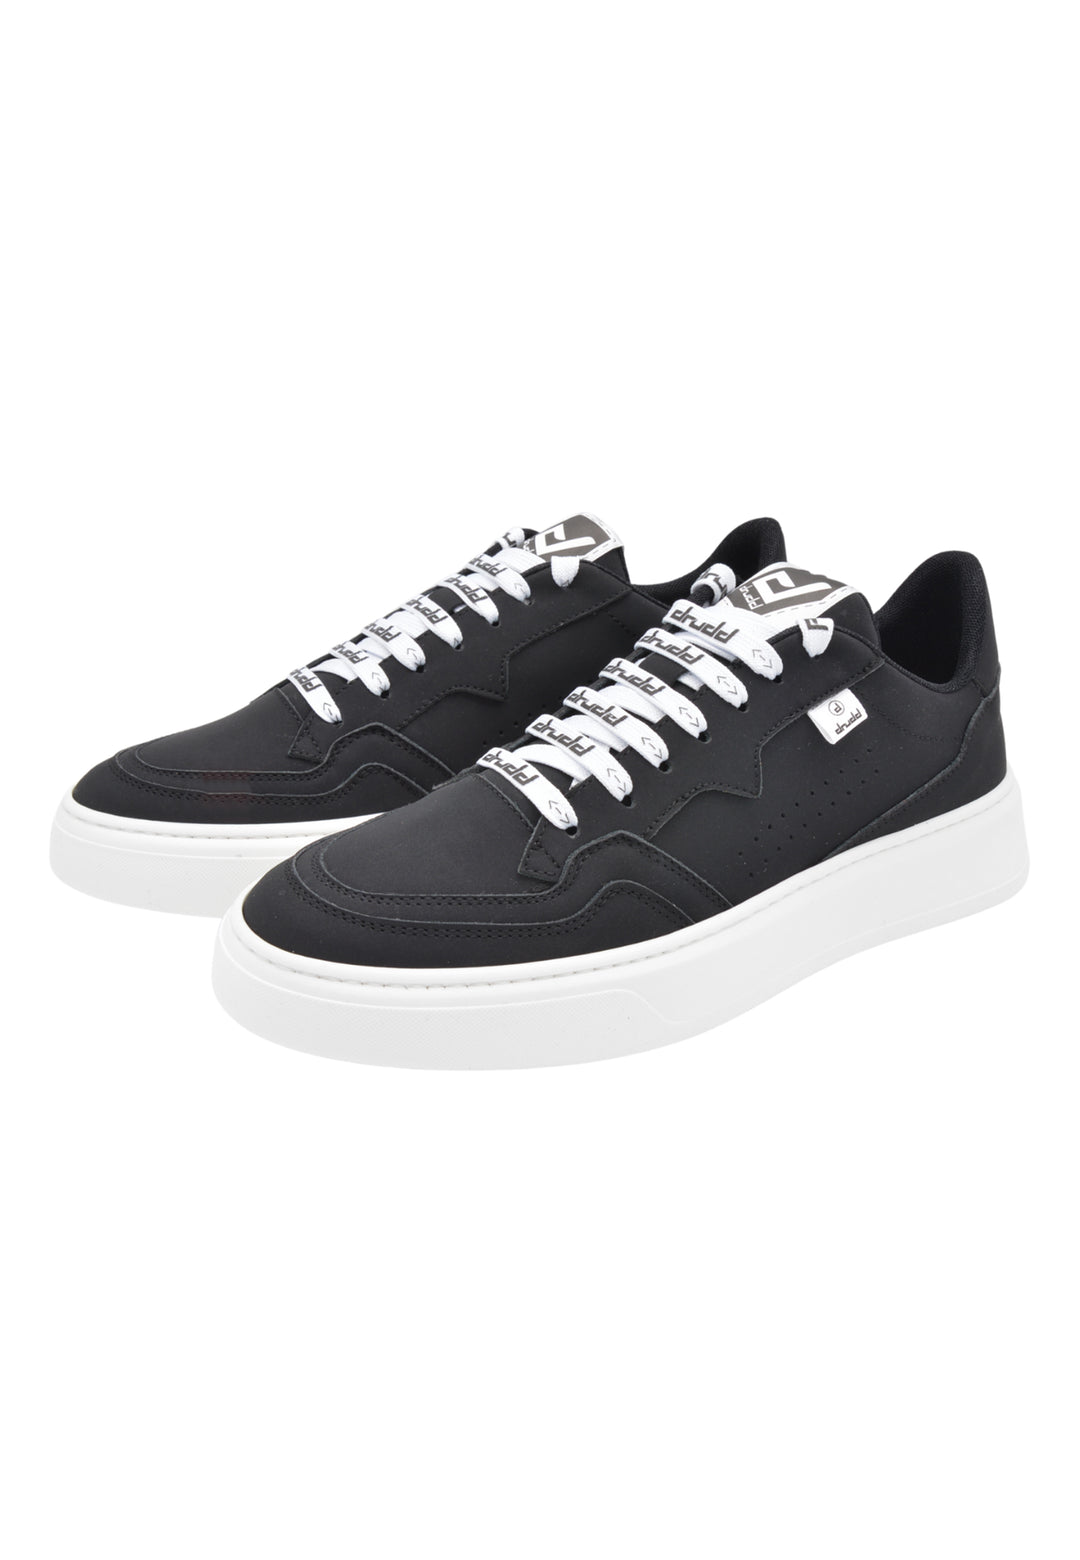 Sneakers Pelle Riciclata Nera - DR1